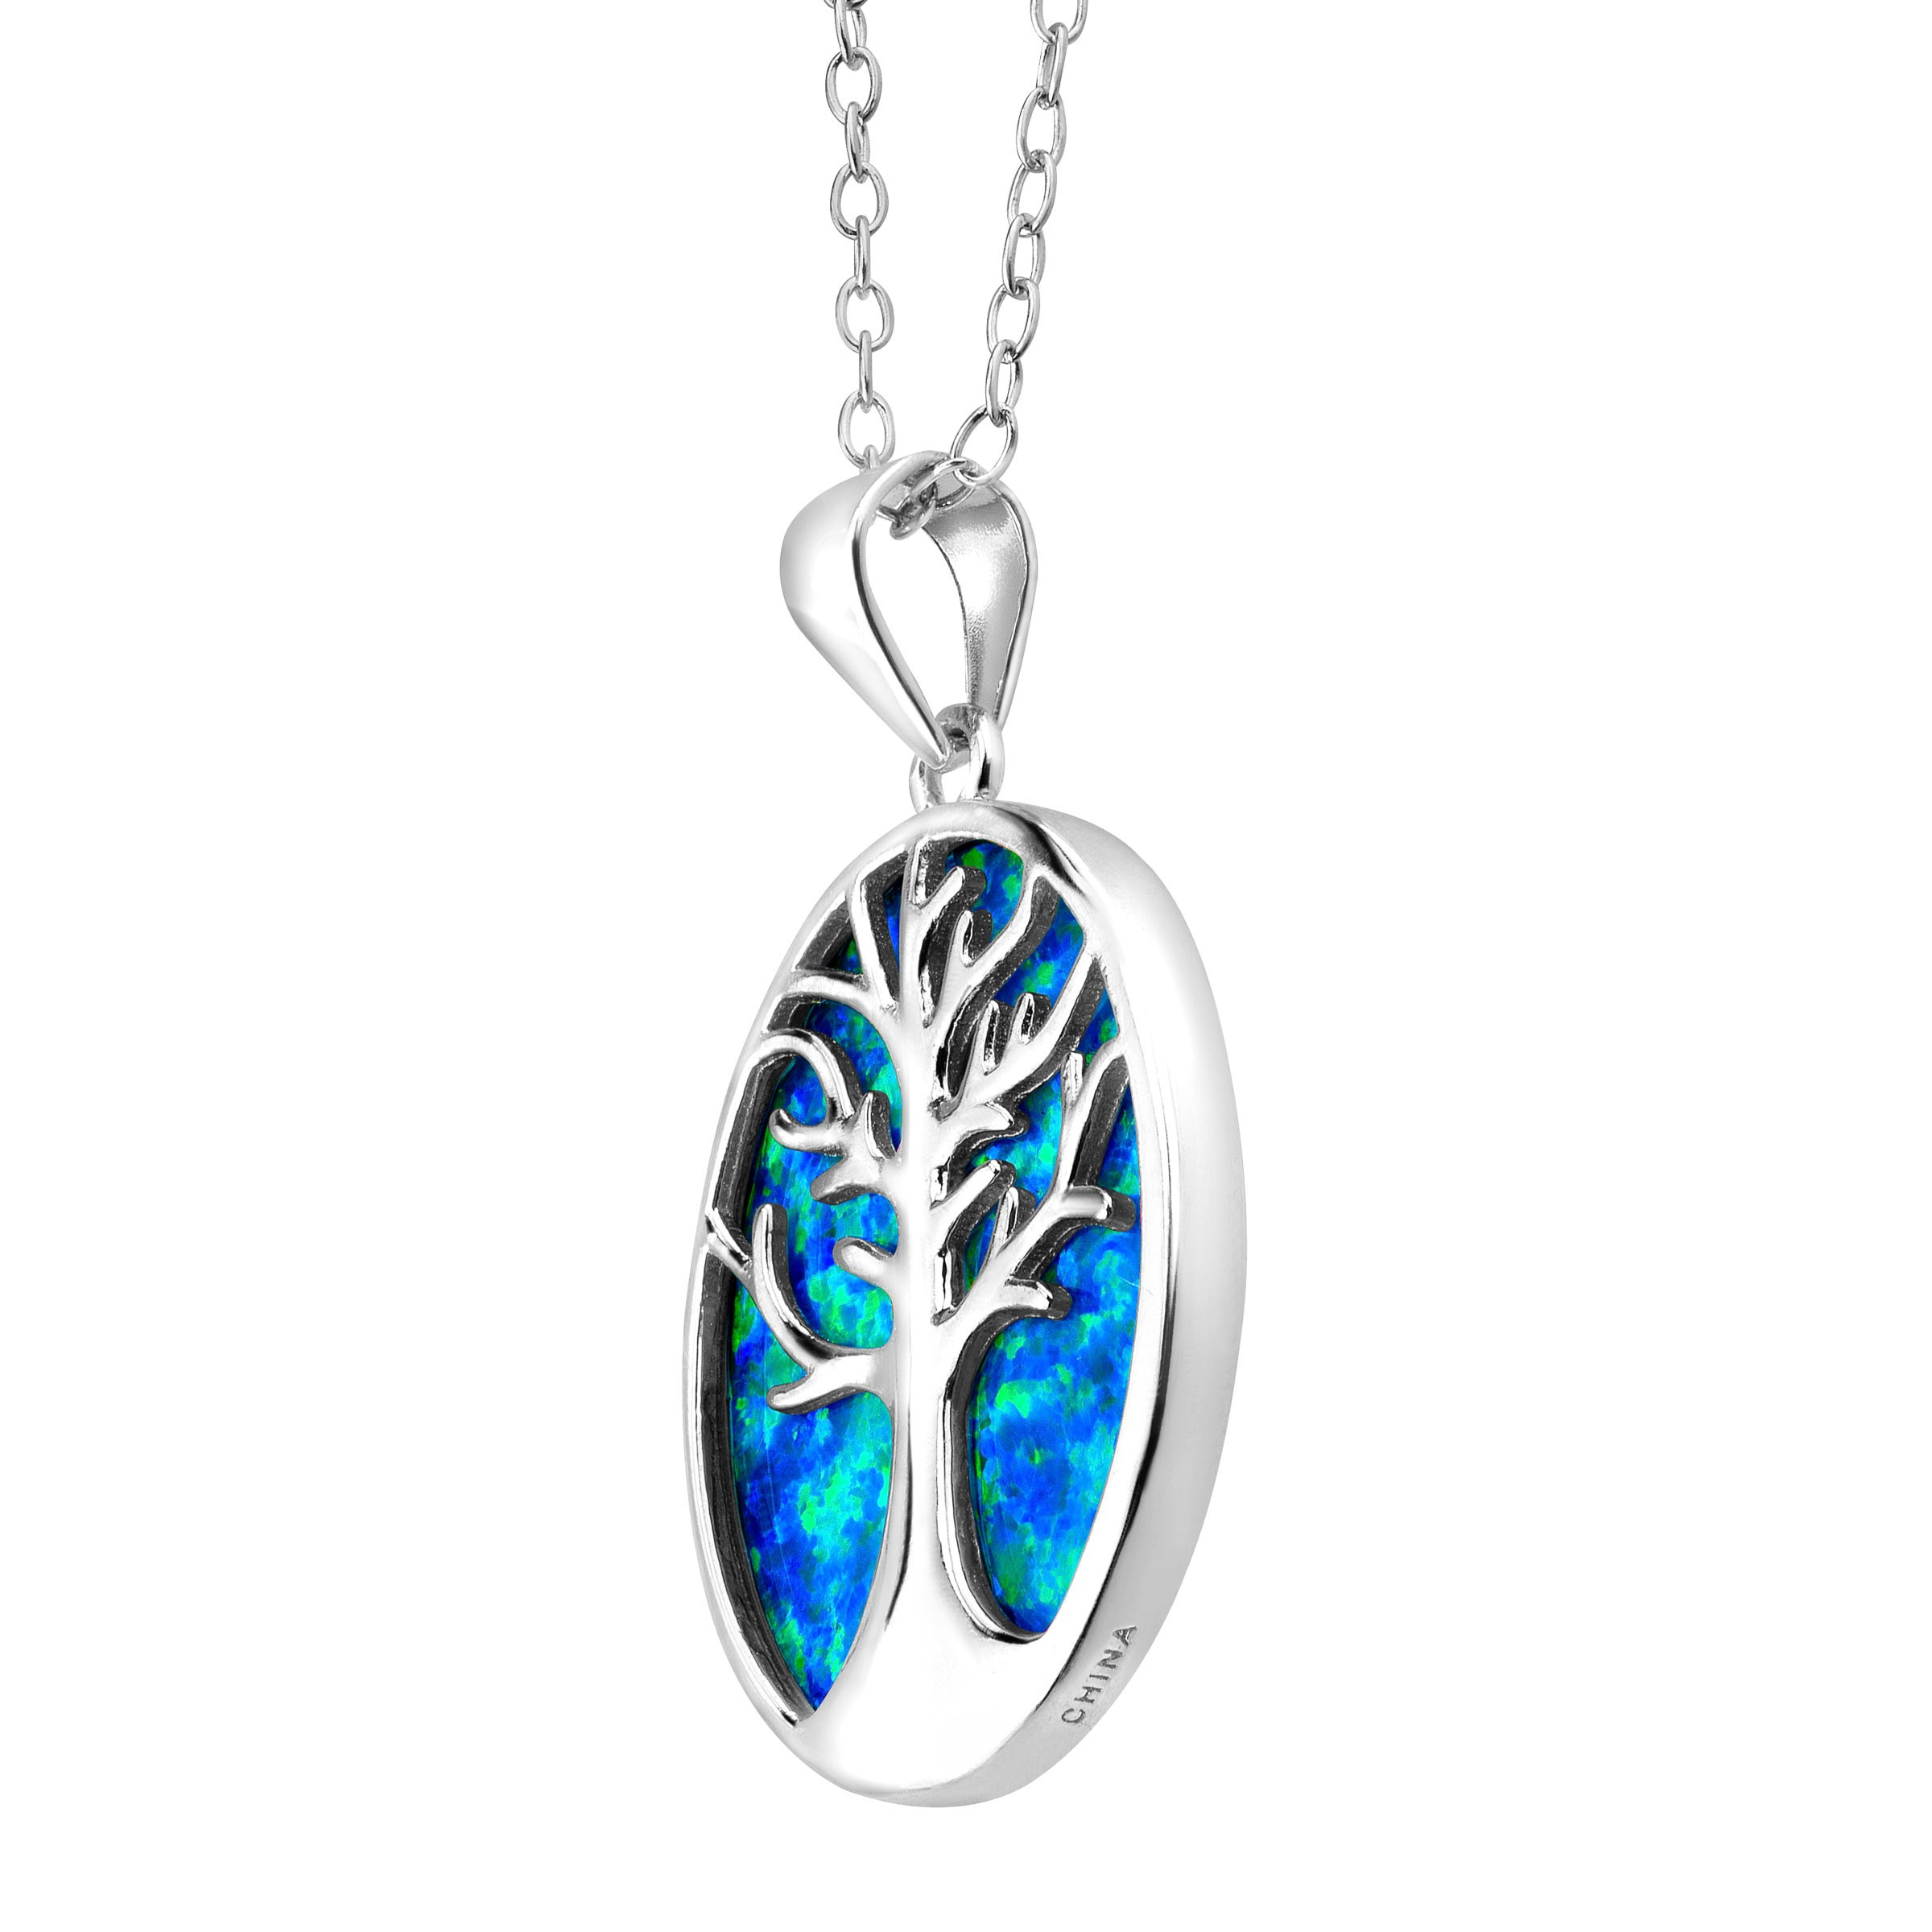 Blue Opal Necklace
 Tree of Love Created Blue Opal Cutout Pendant in Sterling